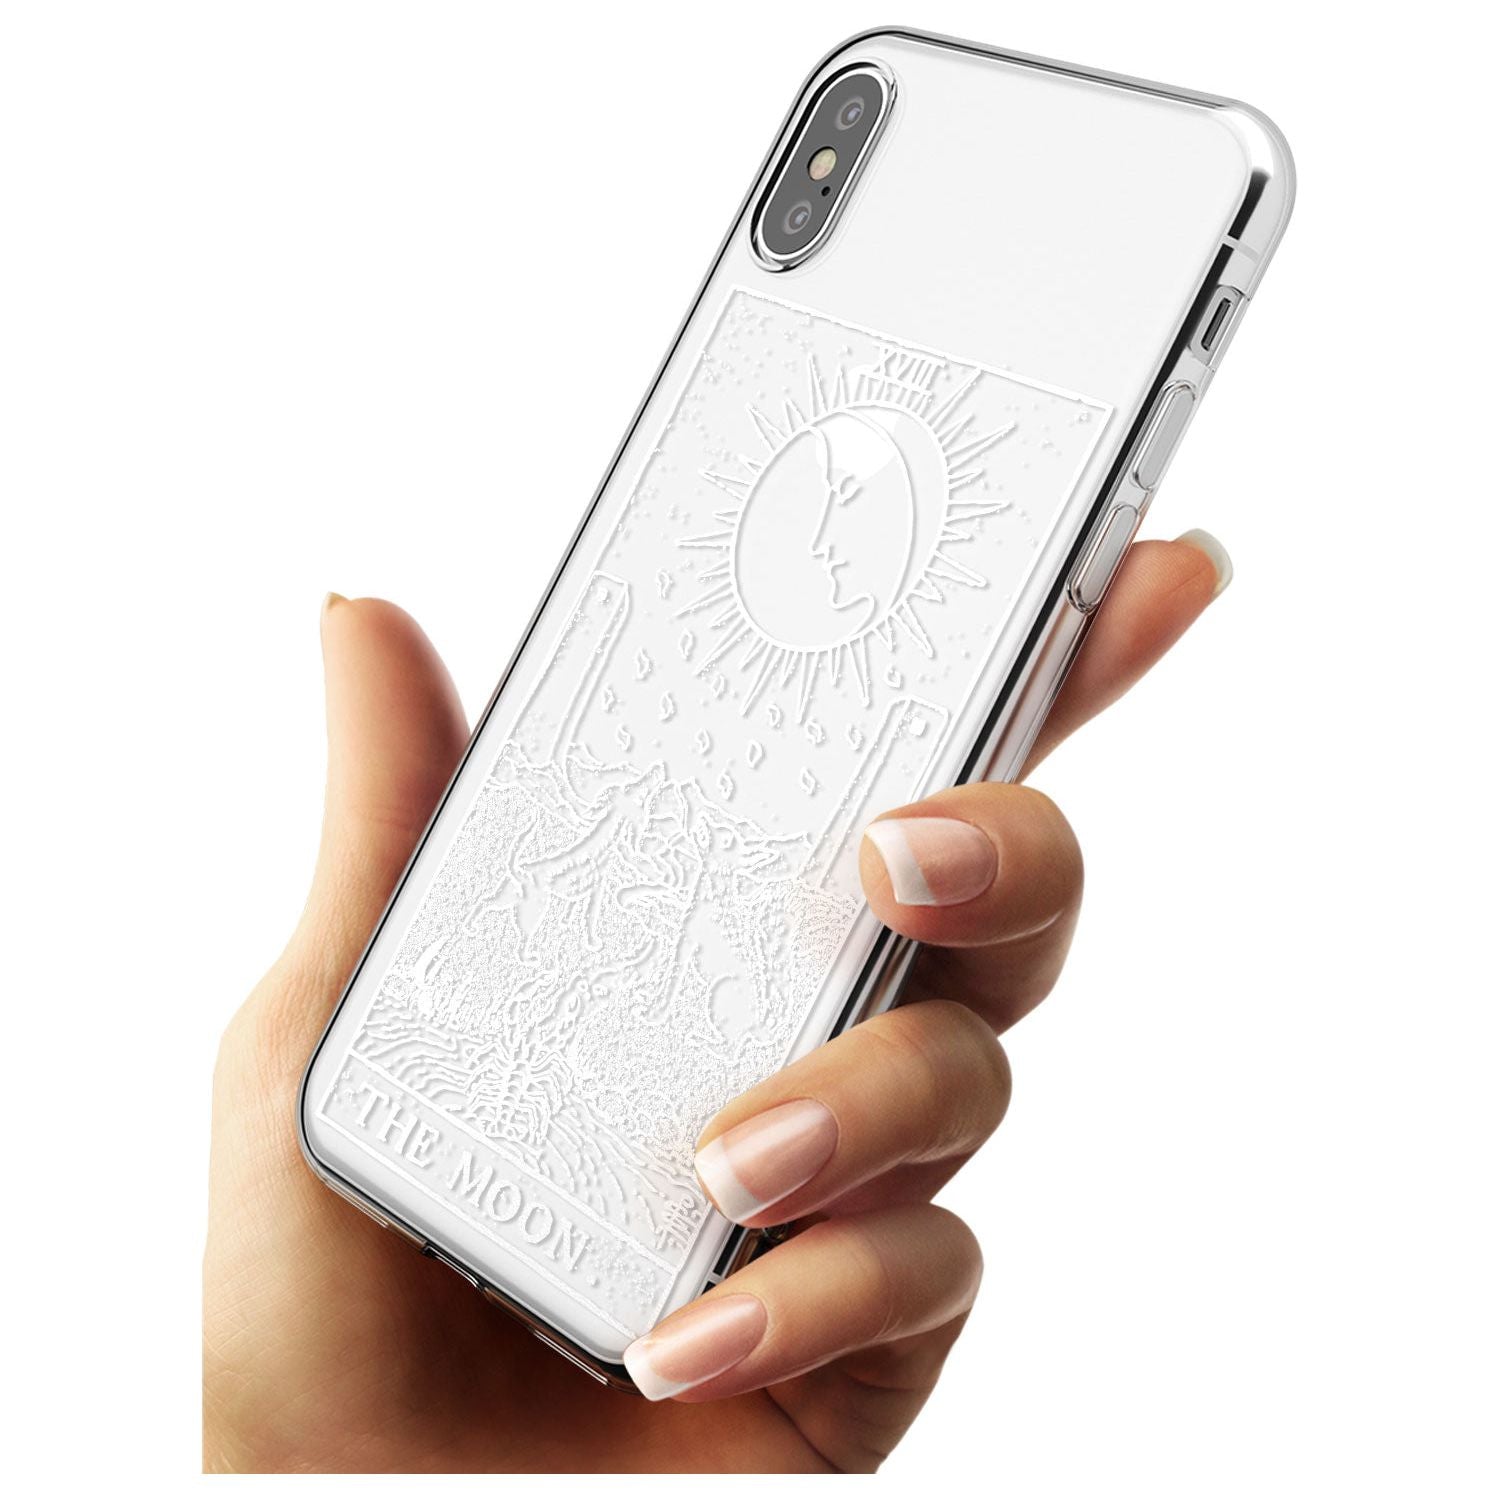 The Moon Tarot Card - White Transparent Black Impact Phone Case for iPhone X XS Max XR